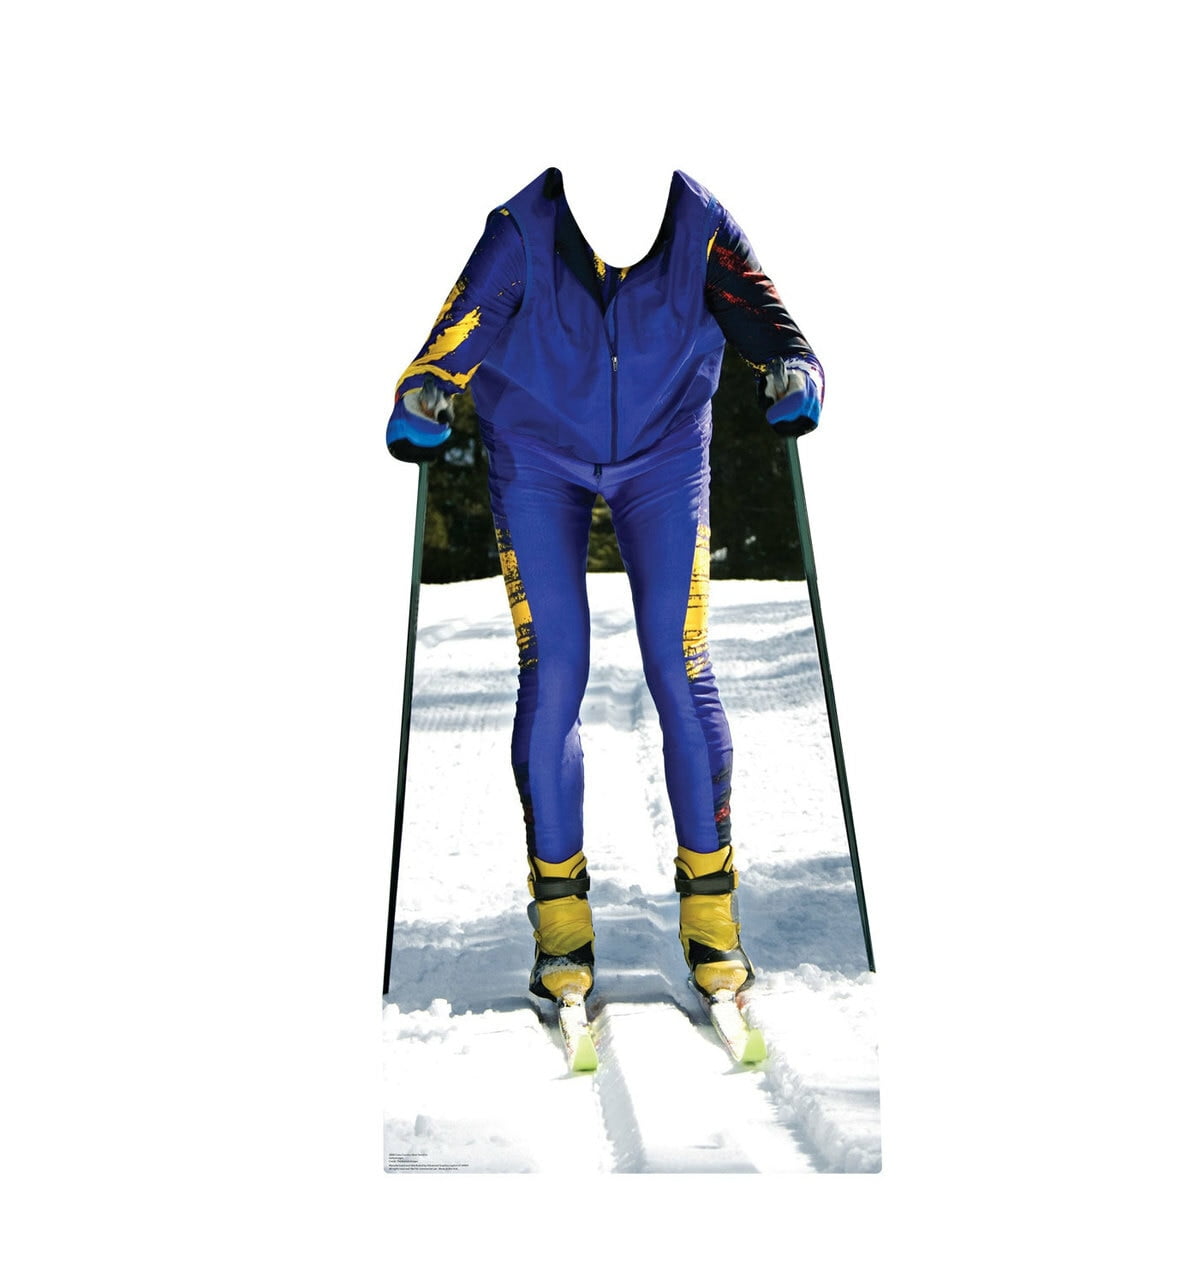 2668 62 X 30 In. .cross Country Skier Standin Wall Decal